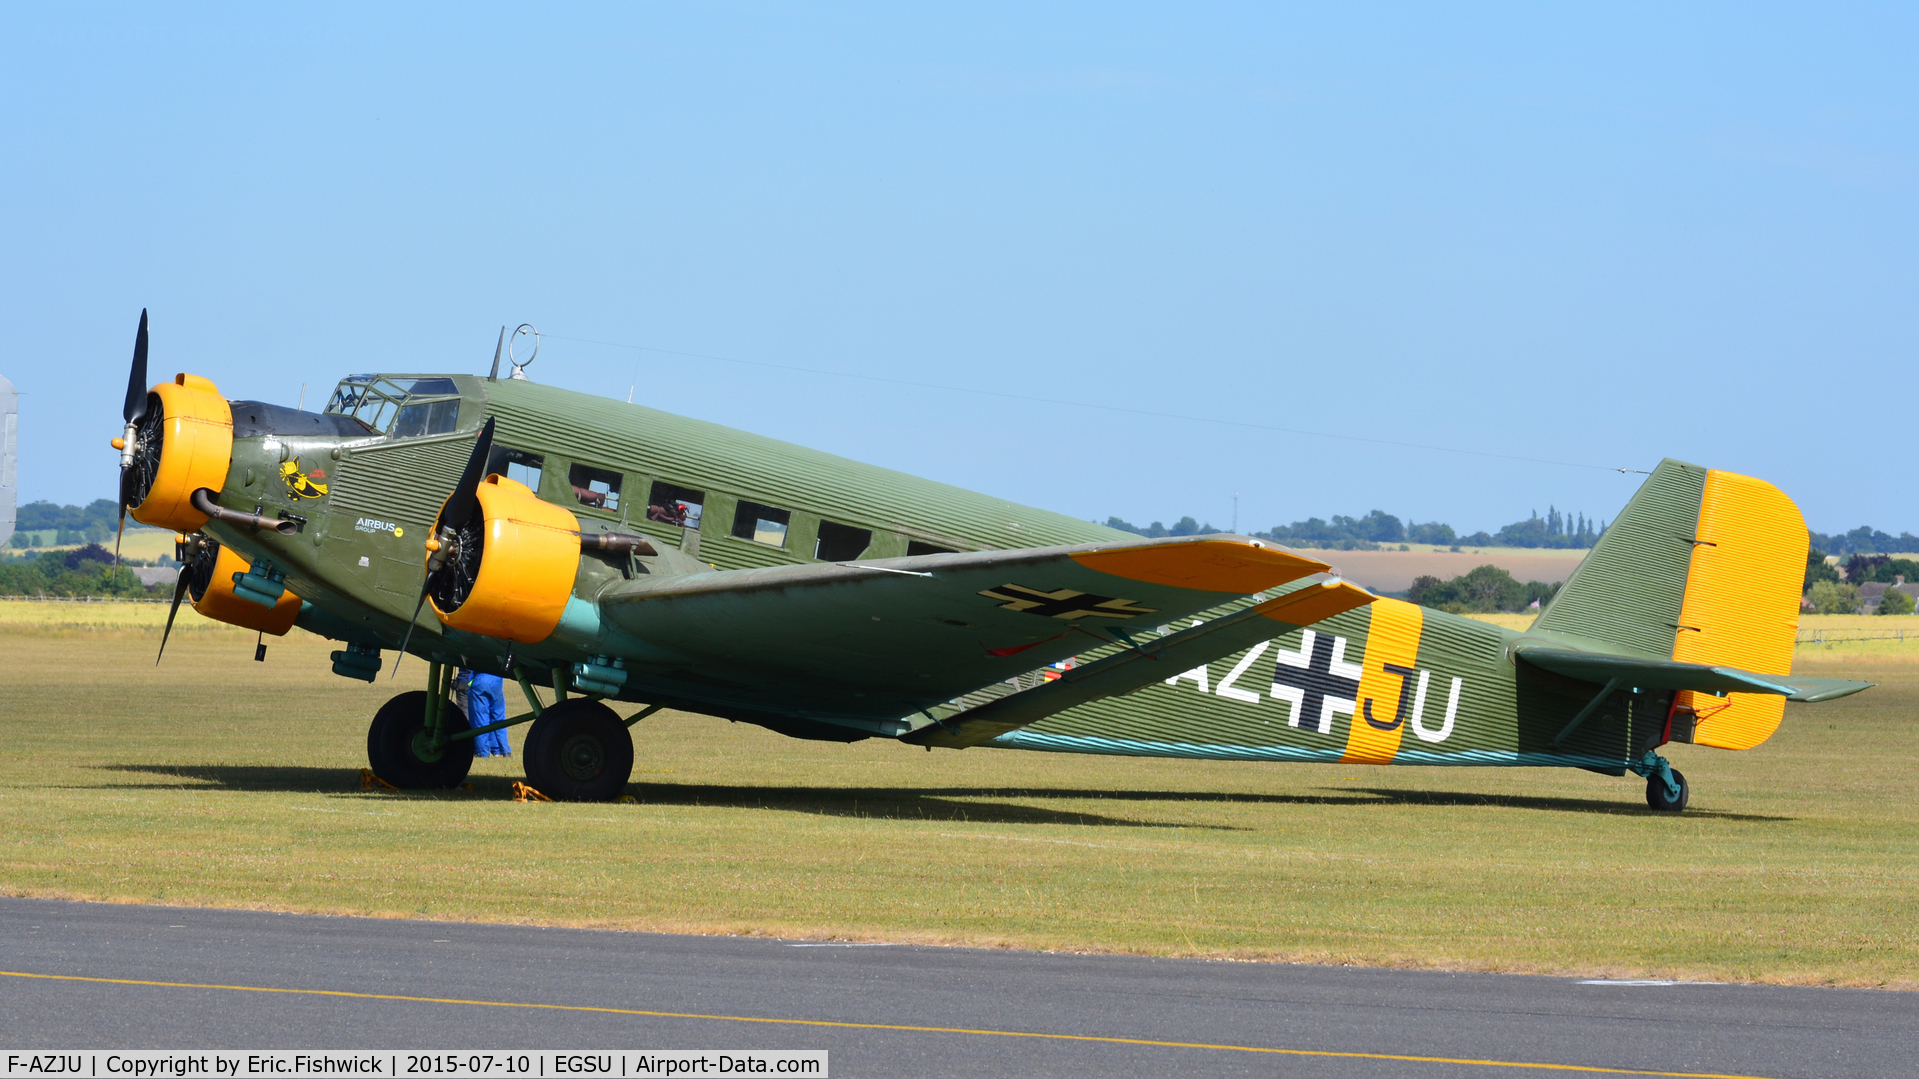 F-AZJU, 1952 Junkers (CASA) 352L (Ju-52) C/N 103, 2. F-AZJU on the eve of Flying Legends Air Show, Duxford - July 2015.